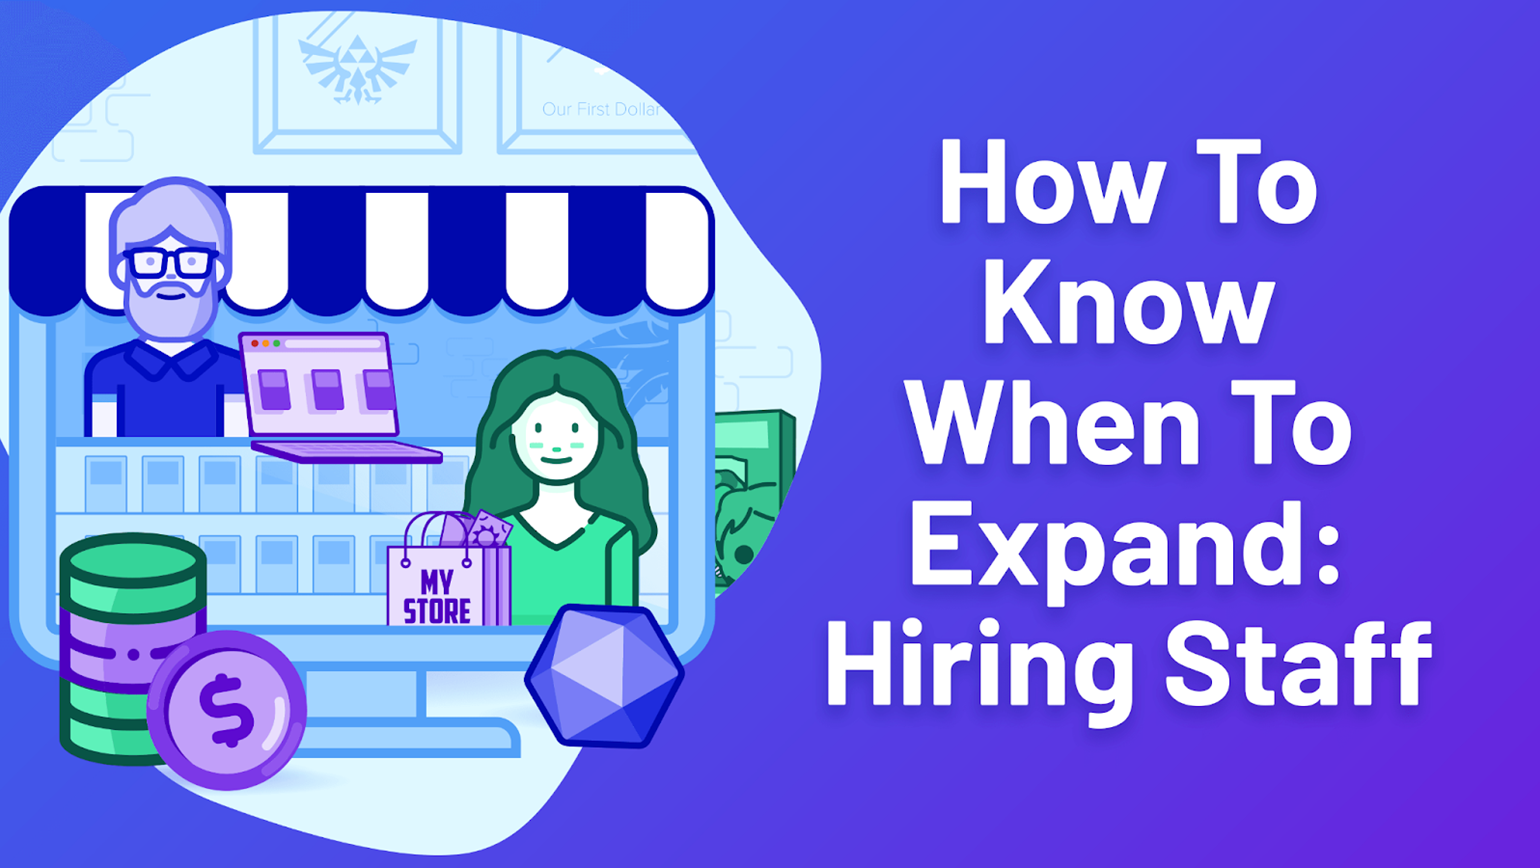 How To Know When To Expand: Hiring Staff